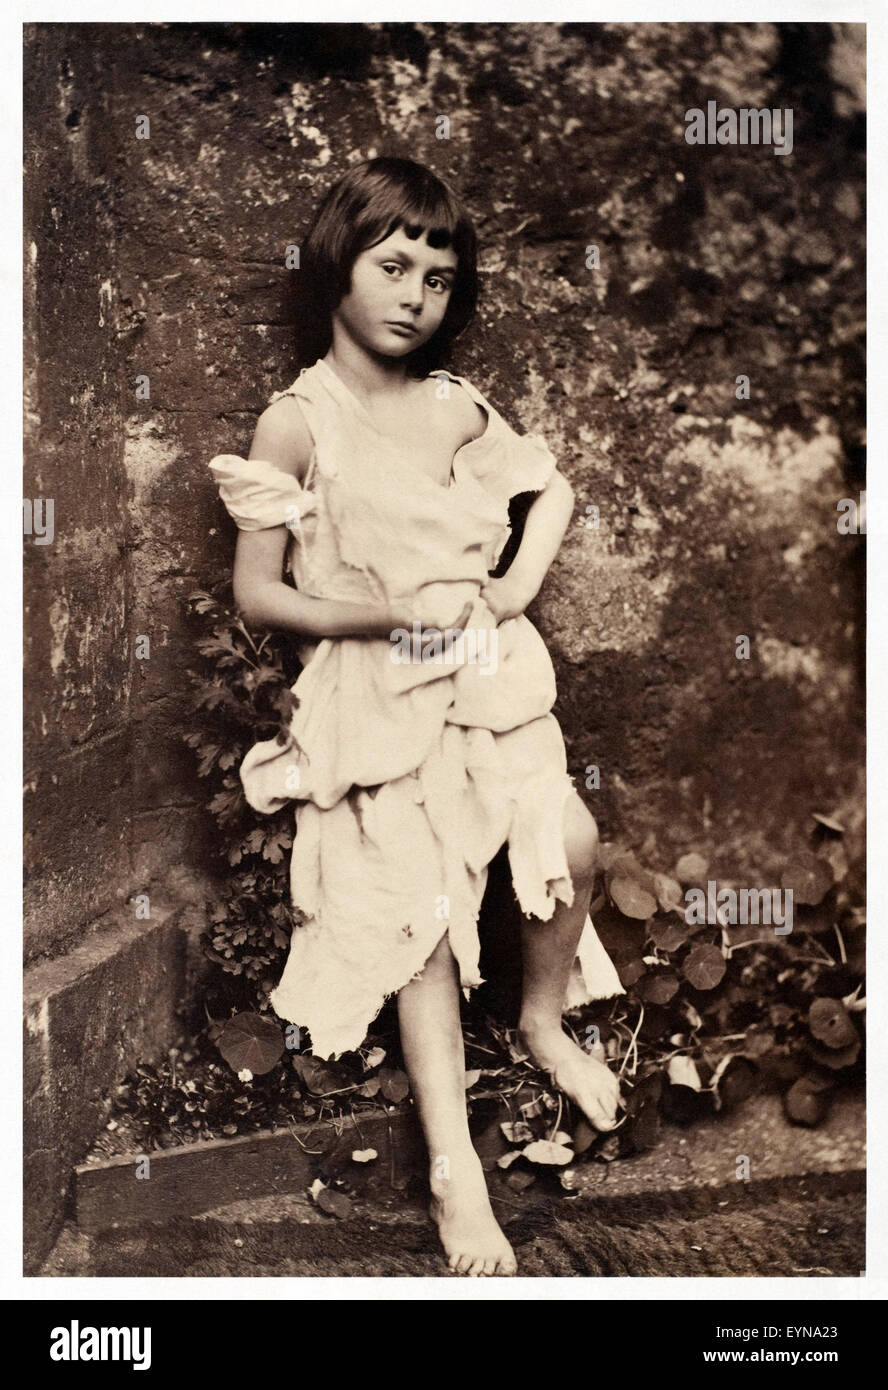 Alice Liddell (1852-1934) dressed as 'Beggar-Maid' in the deanery garden at Christ Church, Oxford University in 1858. This collodion photograph was taken by Charles Lutwidge Dodgson (1832-1898), better known as Lewis Carroll, and would have required over 40 seconds of exposure. 'The Beggar Maid' was a popular poem by Lord Alfred Tennyson (1809-1892) published in 1842, Tennyson thought the portrait one of the most beautiful photographs he had ever seen. See description for more information. Stock Photo